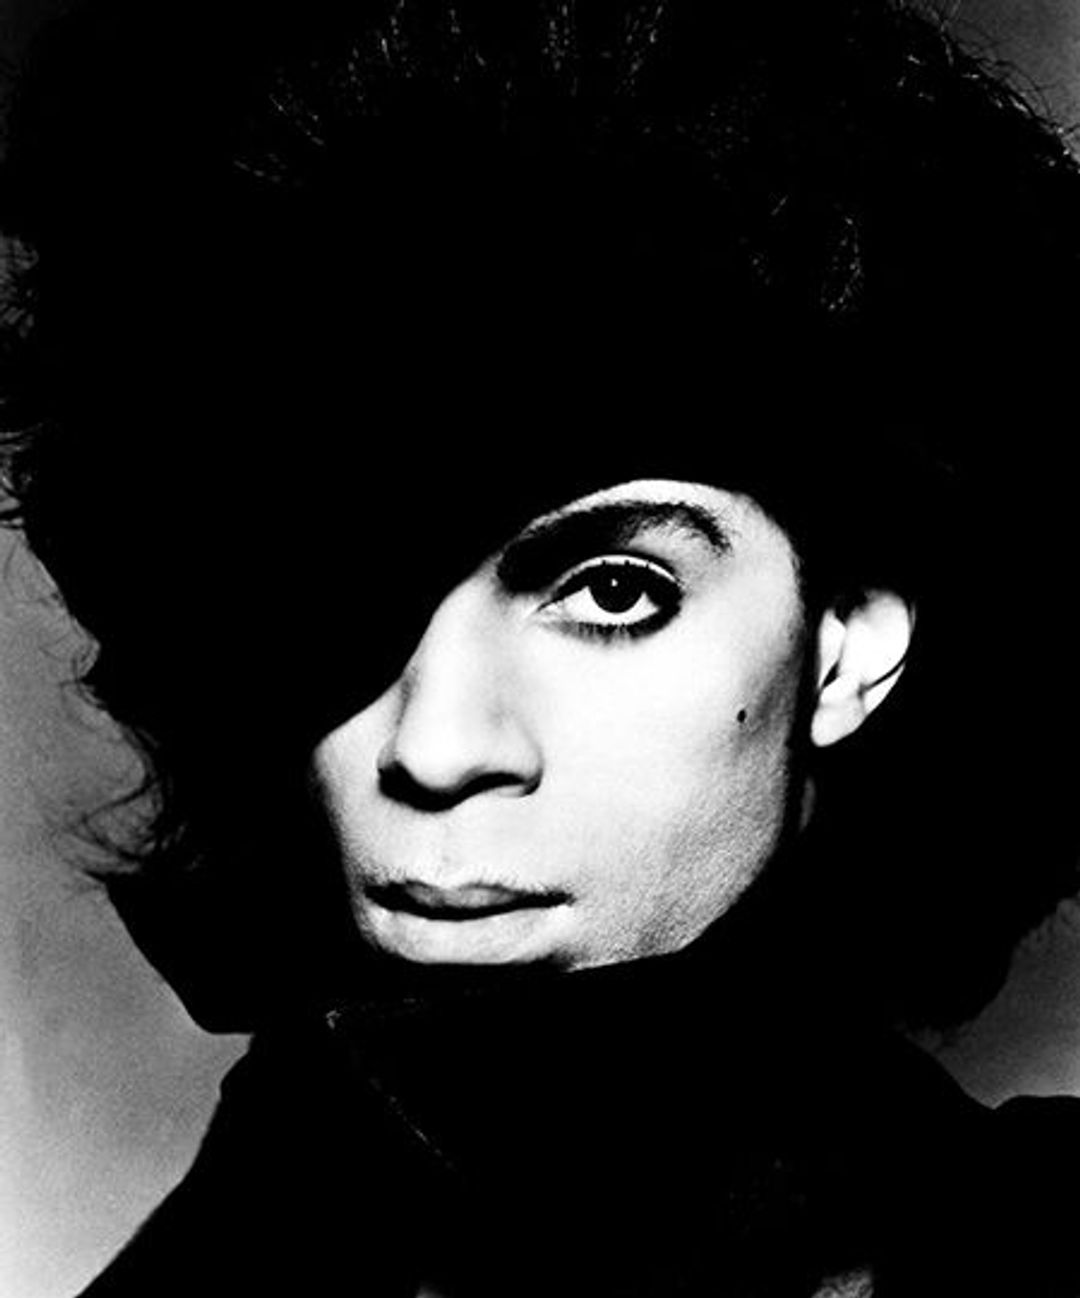 A heavily contrasted photo of Prince's face. A mole on his cheek. Stone cheekbones. He's possibly wearing a large black hat but the light's too dark to see.